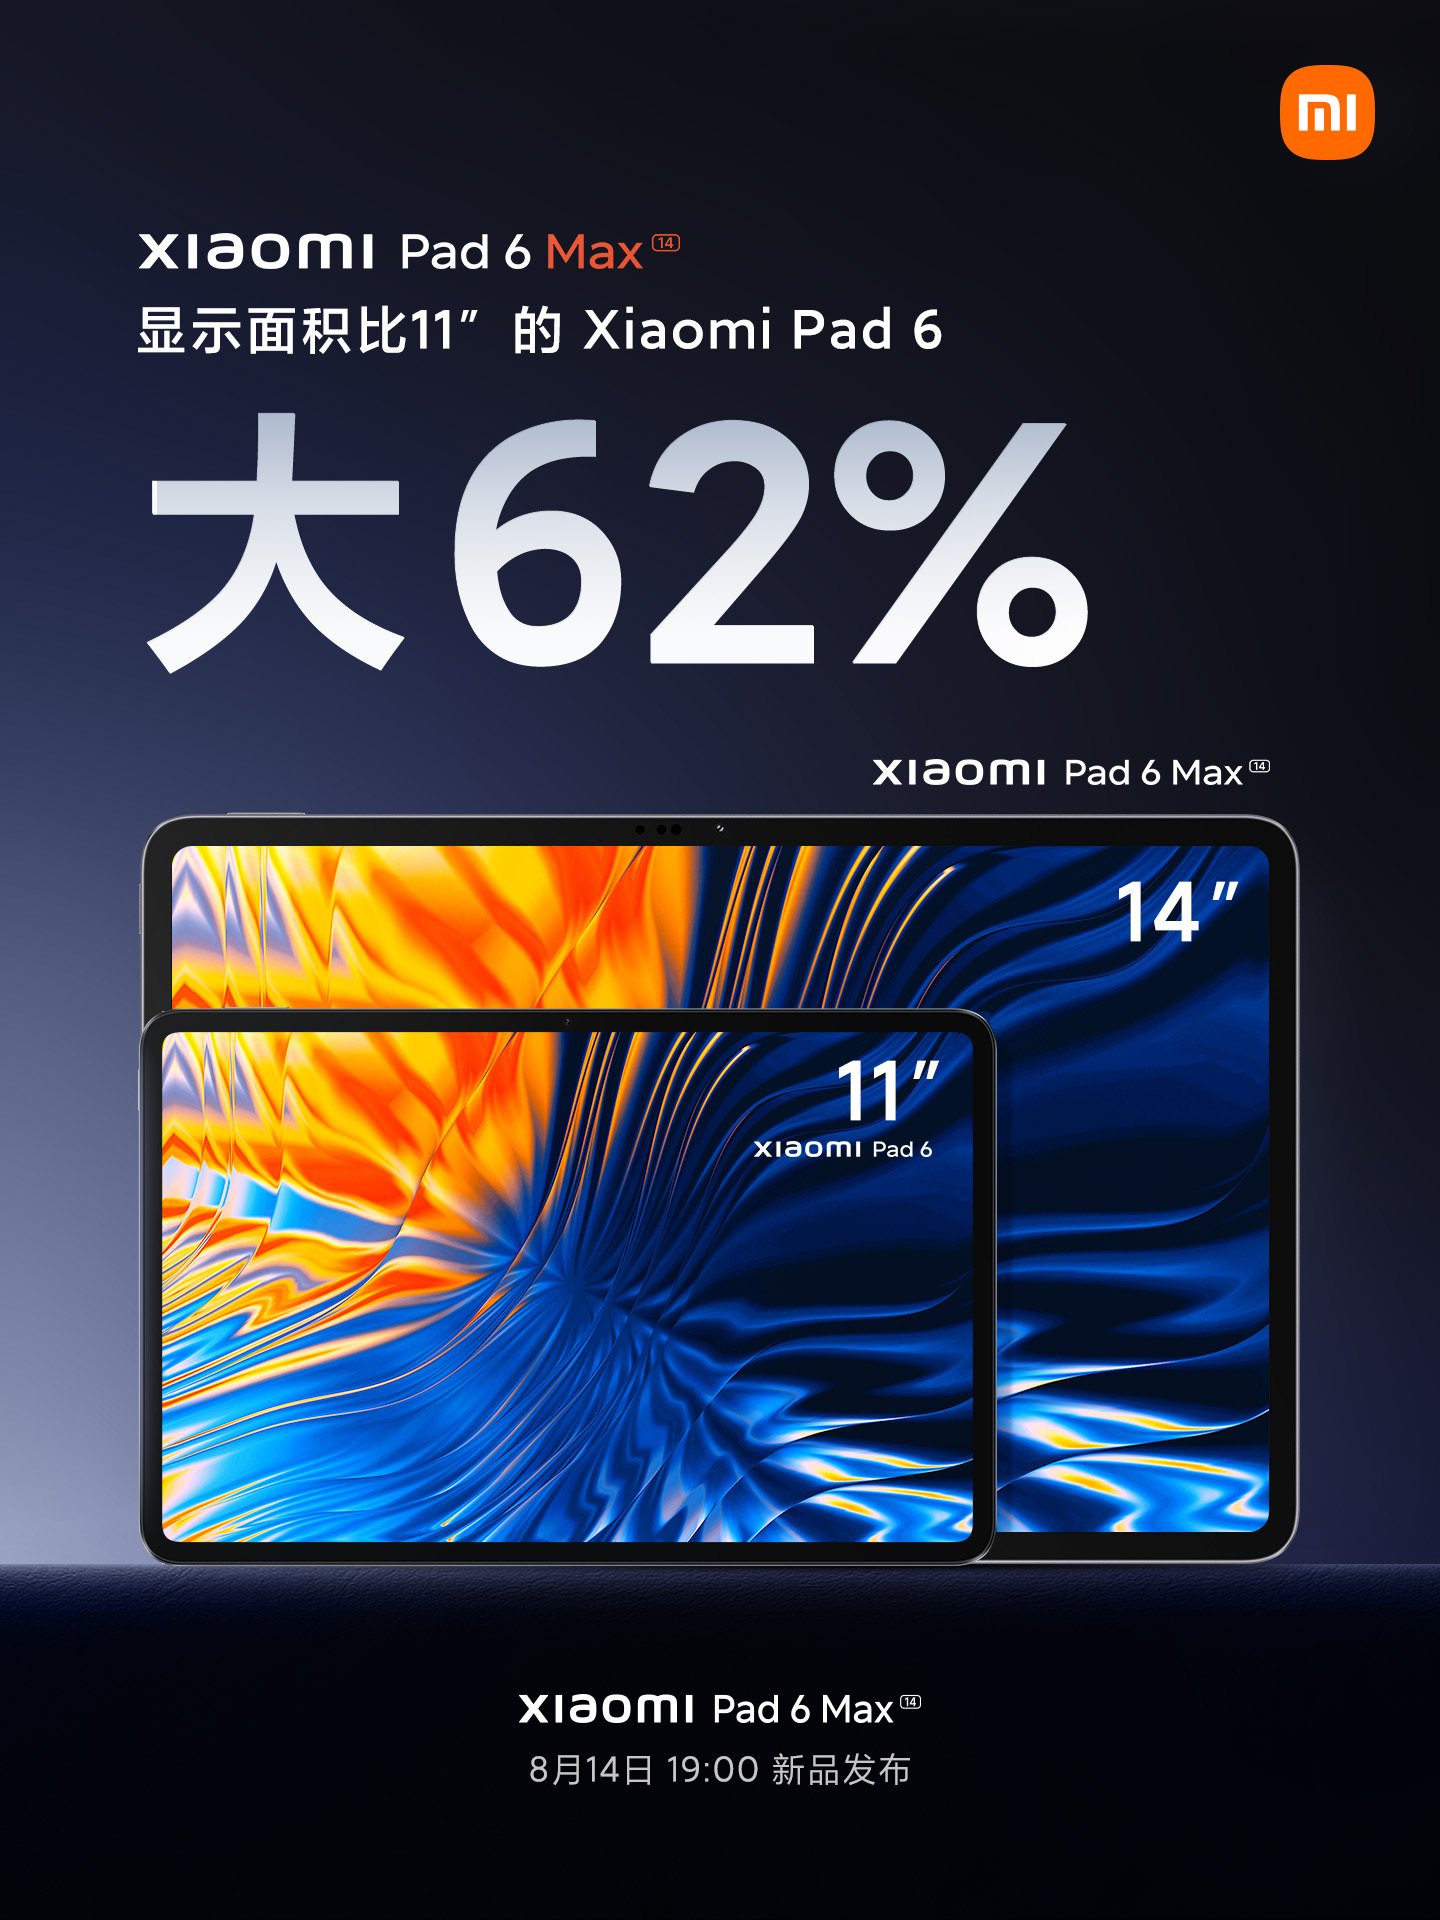 Xiaomi Pad 6 coming soon in India: First look